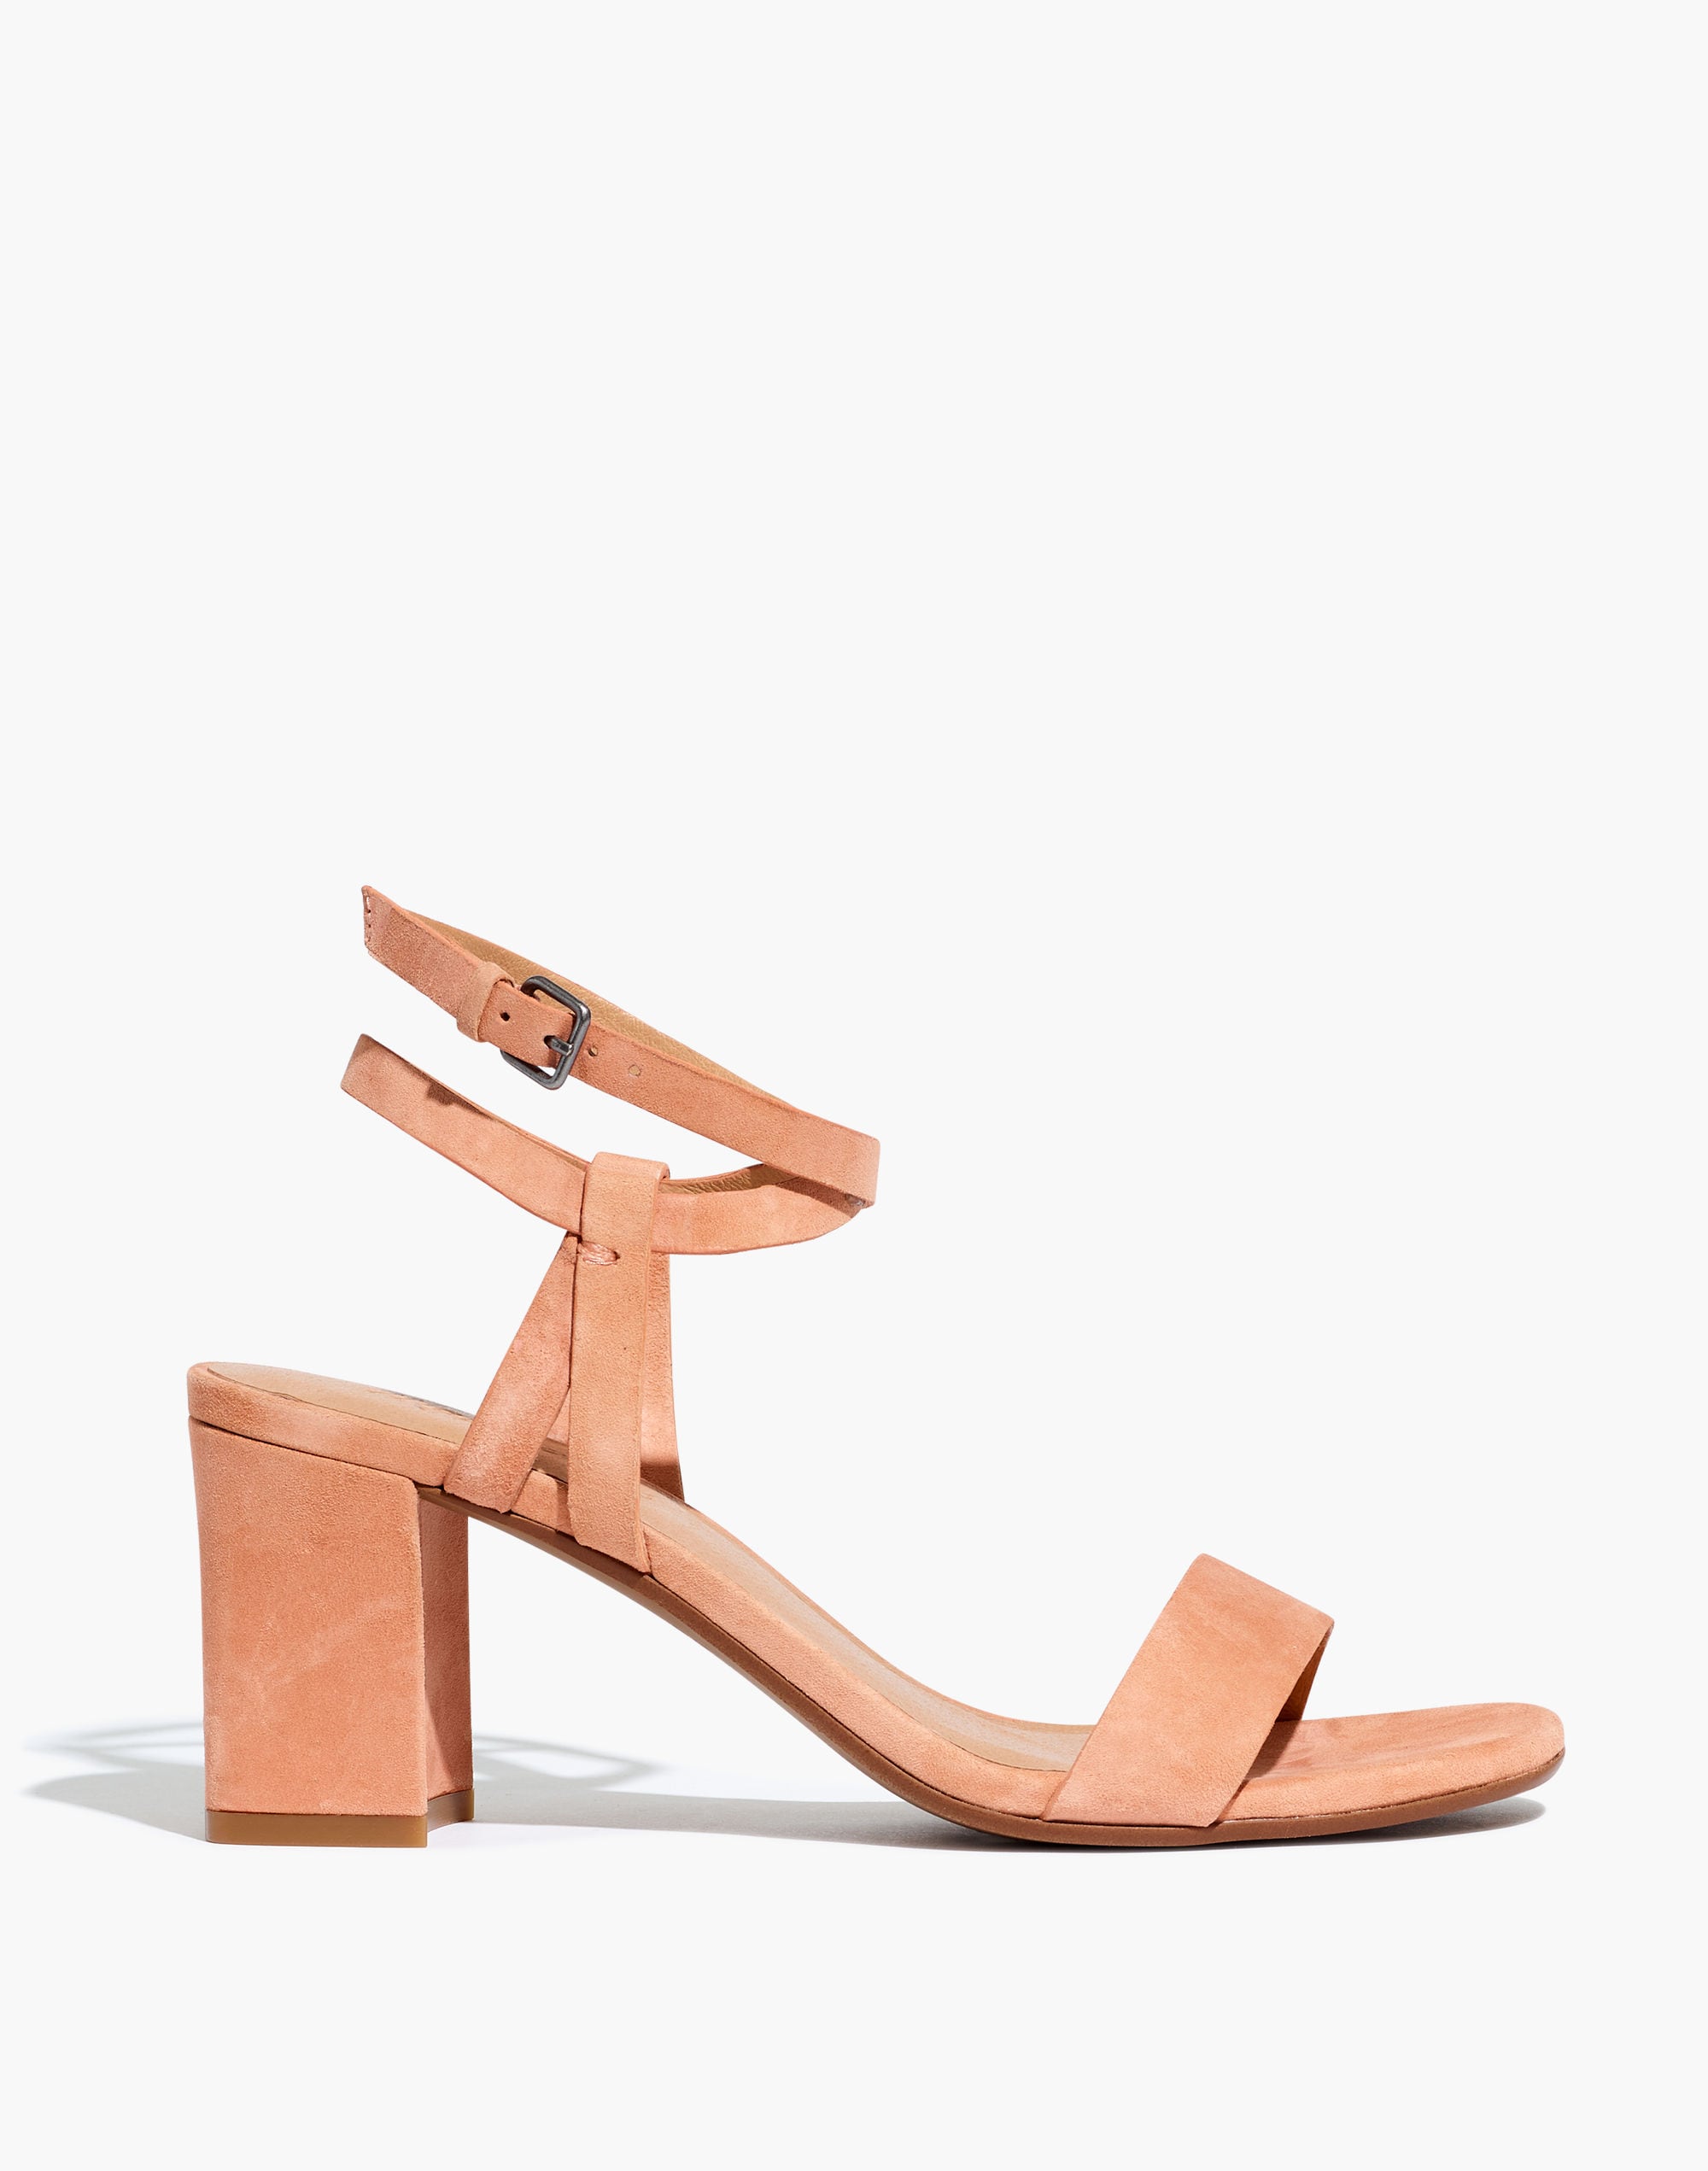 The Loli Ankle-strap Sandal in Suede